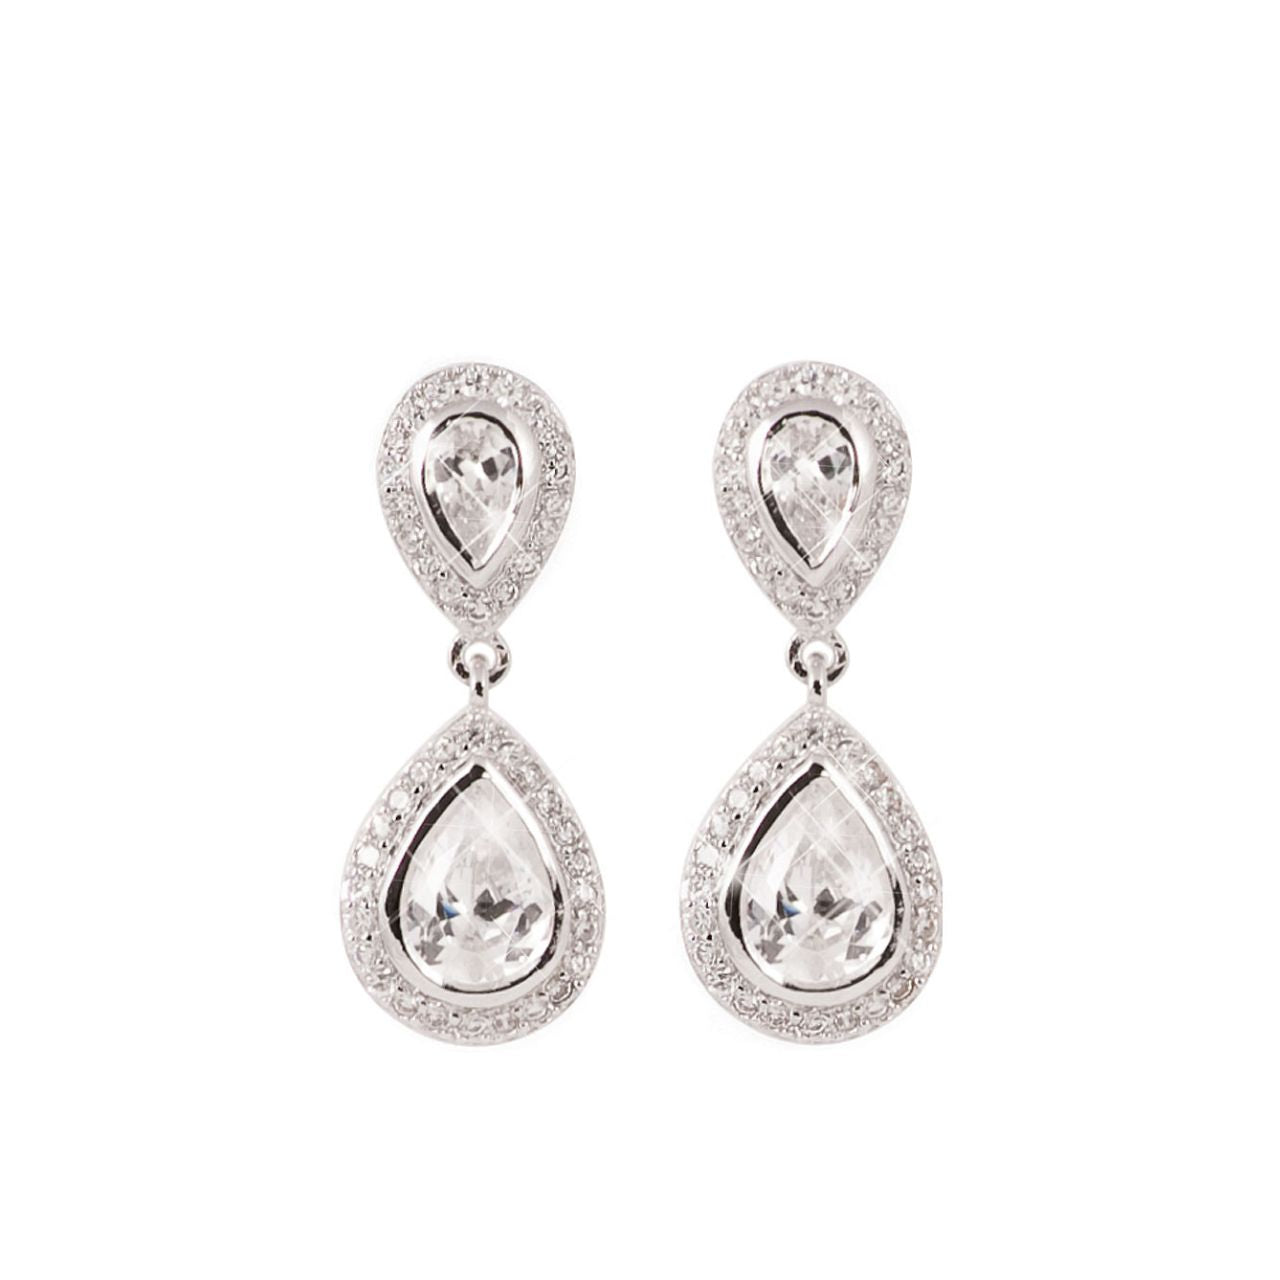 Tipperary Pear Shaped CZ Drop Earrings Silver  These elegant double tear-drop earrings are a captivating look. Fashioned in silver, each earring features a pear-shaped center stone bordered with a halo of shimmering clear crystal accents. A duplicate of these pear-shaped drops suspends from the ﬁrst creating a sparkling mirror image. Polished to a brilliant lustre, these versatile post earrings secure comfortably with push backs.